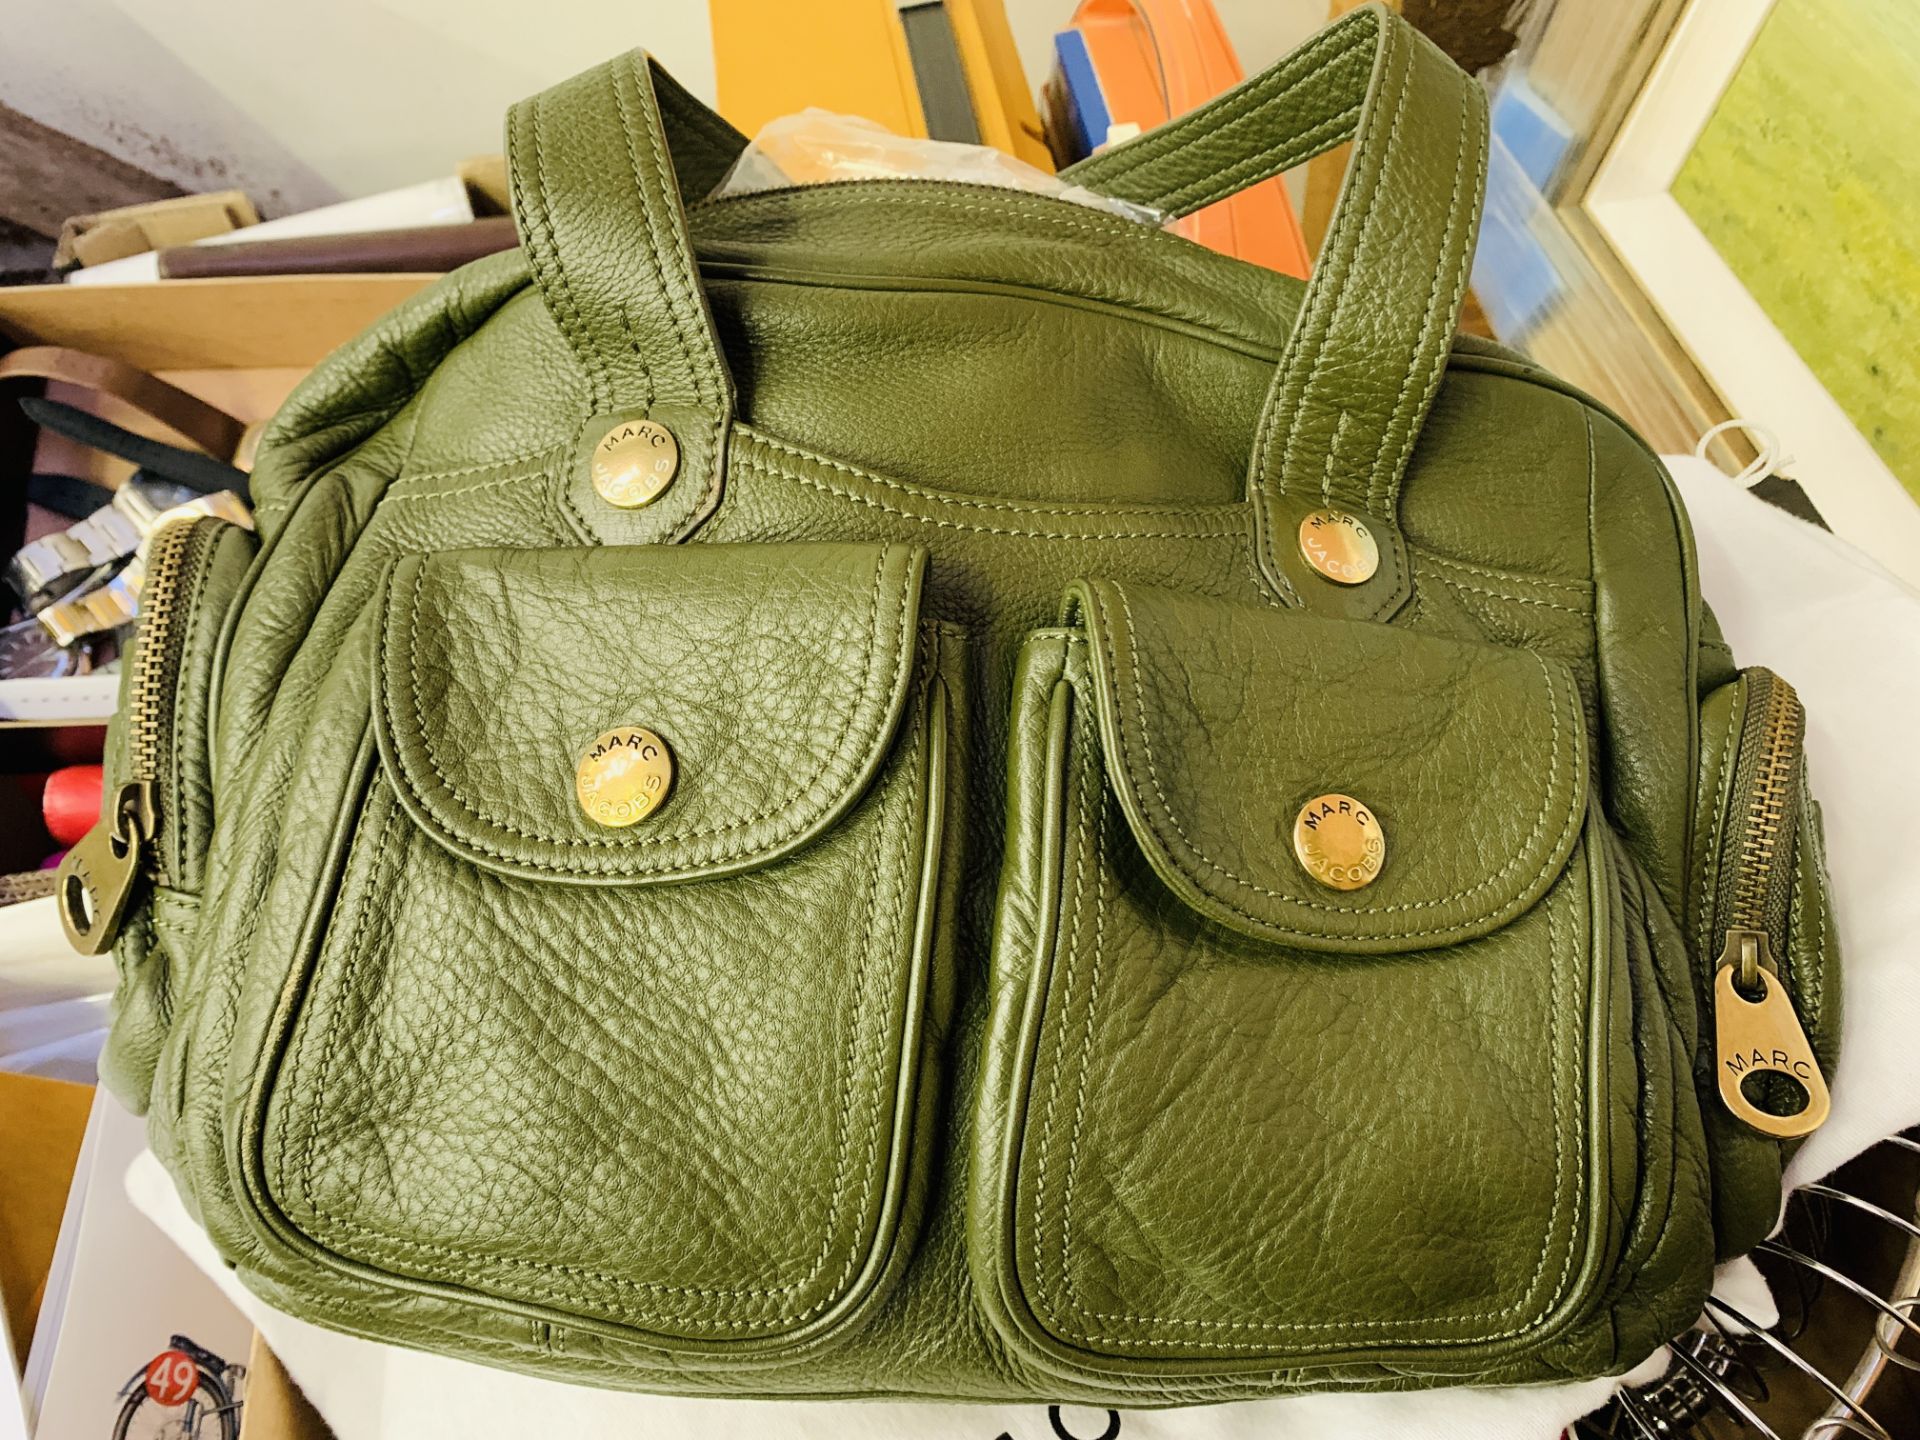 Two leather effect handbags: olive and black